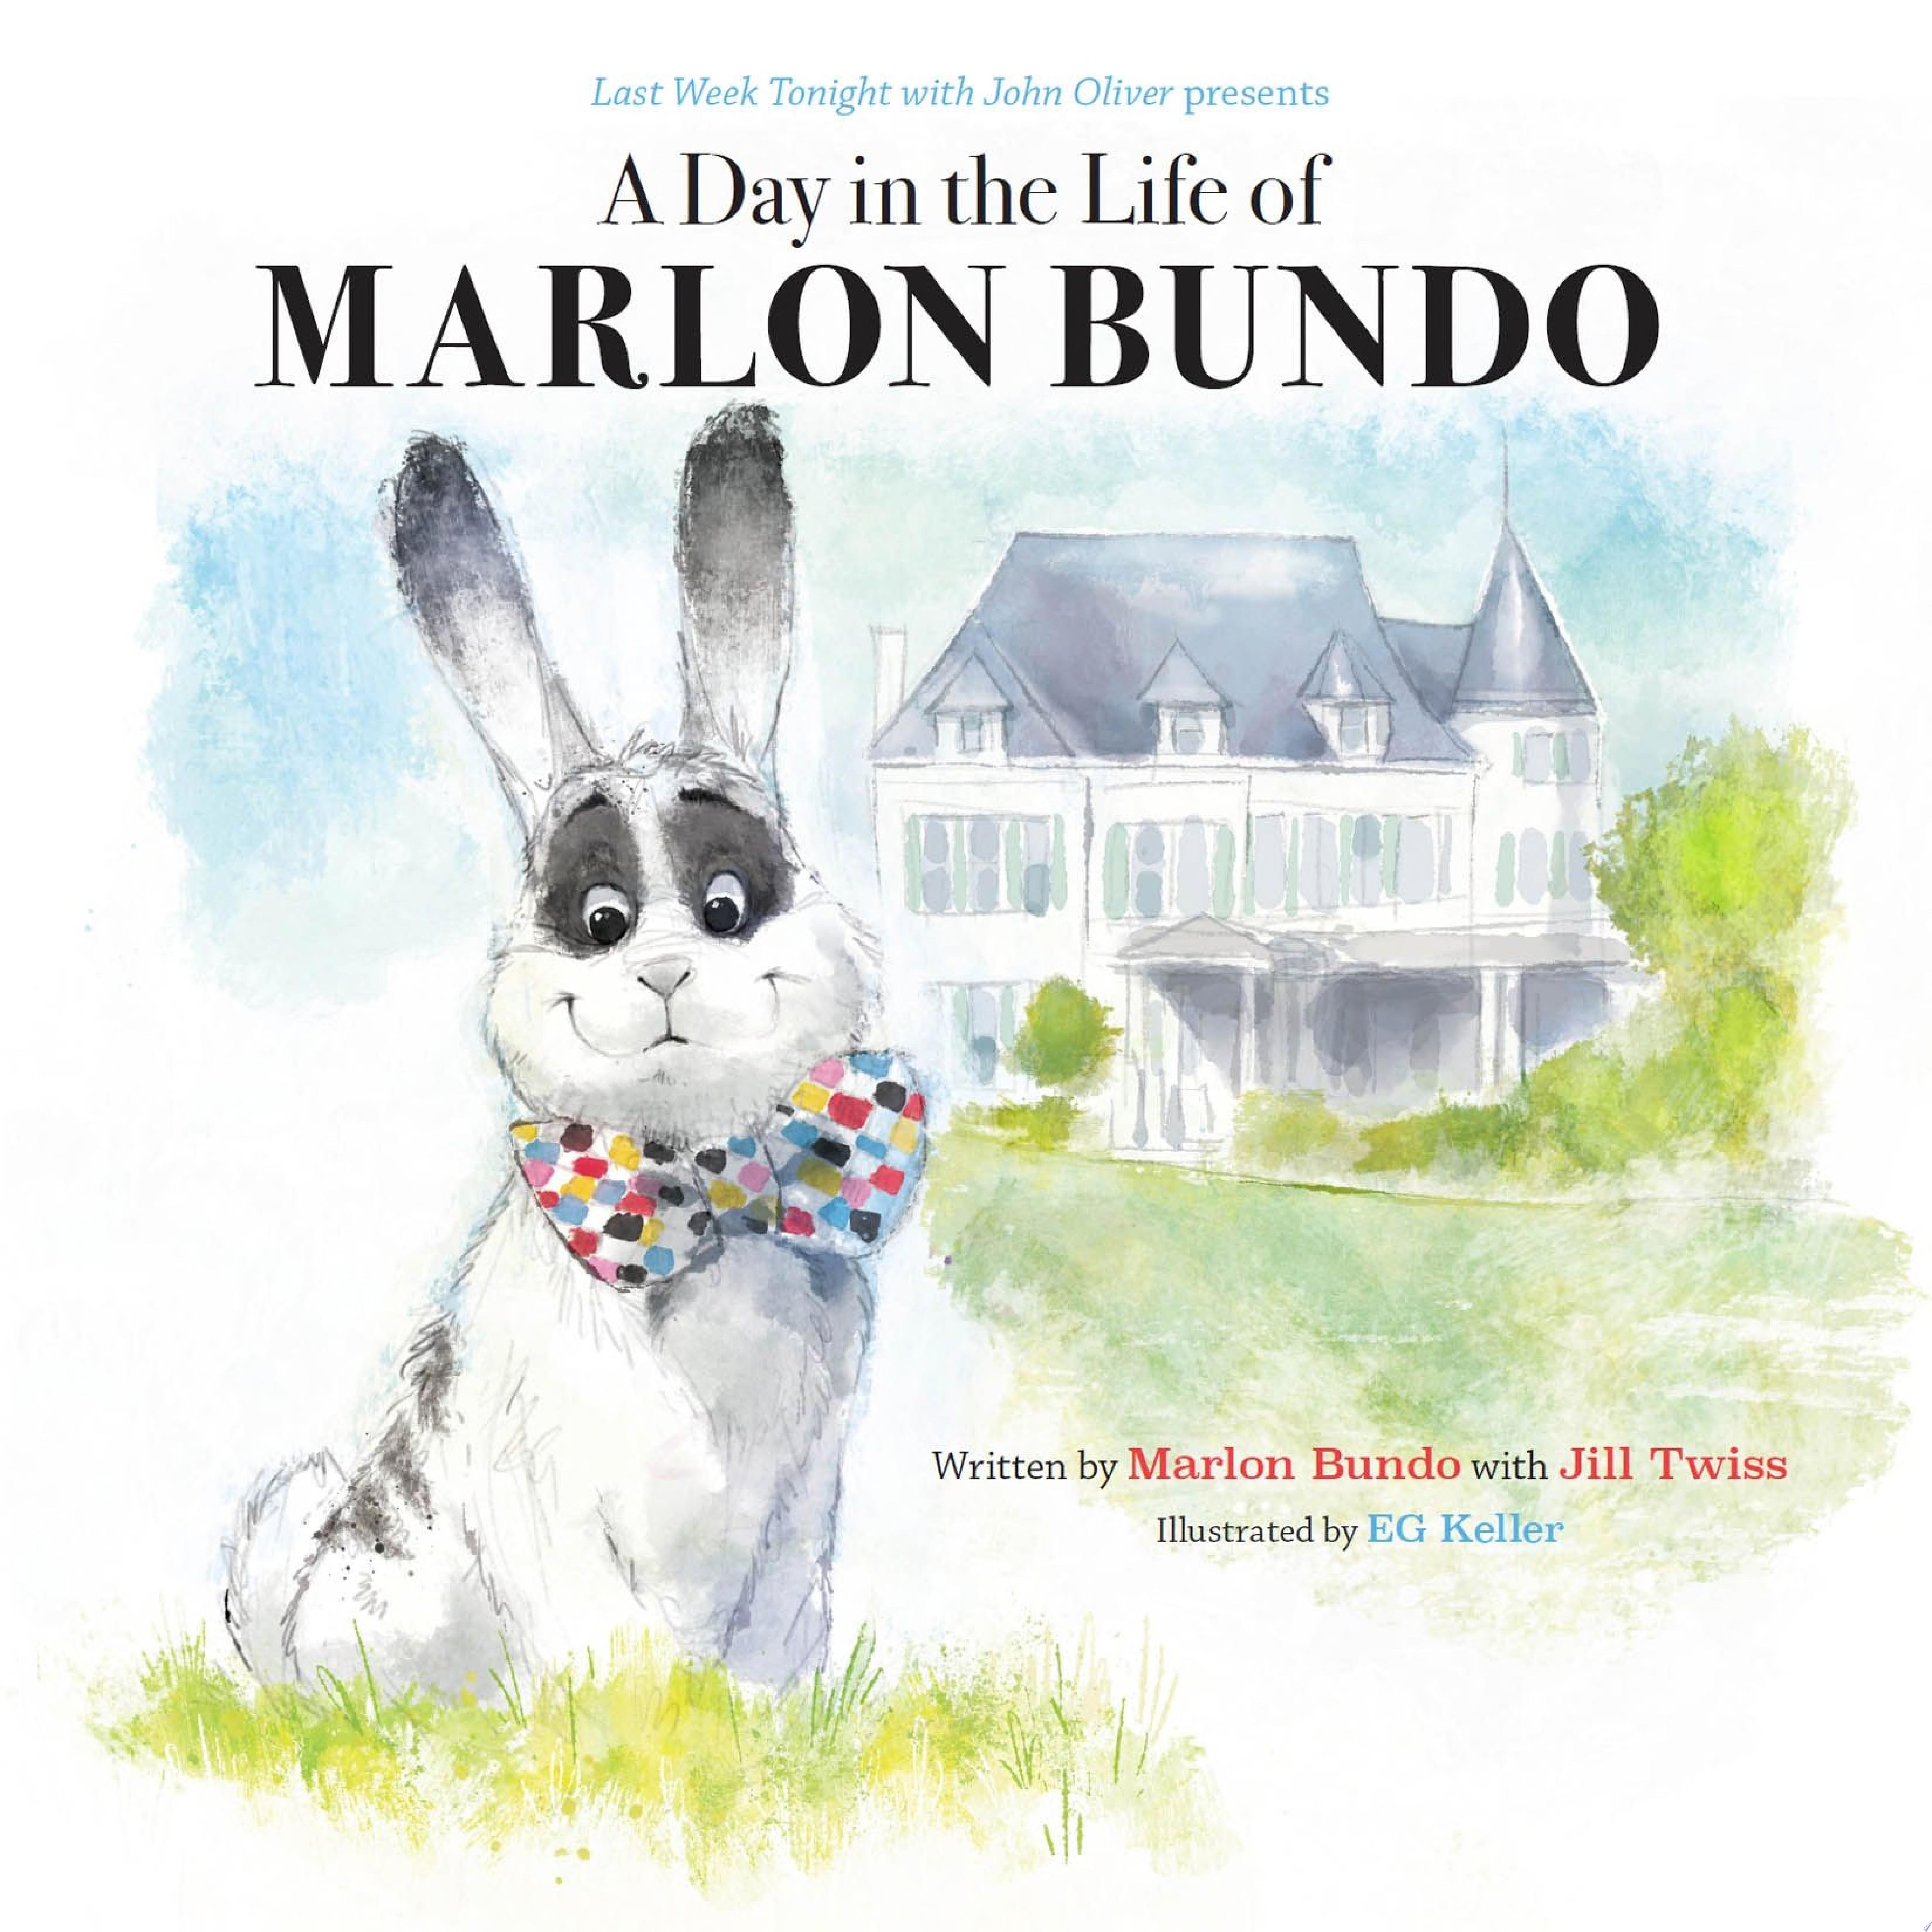 Image for "Last Week Tonight with John Oliver Presents a Day in the Life of Marlon Bundo"